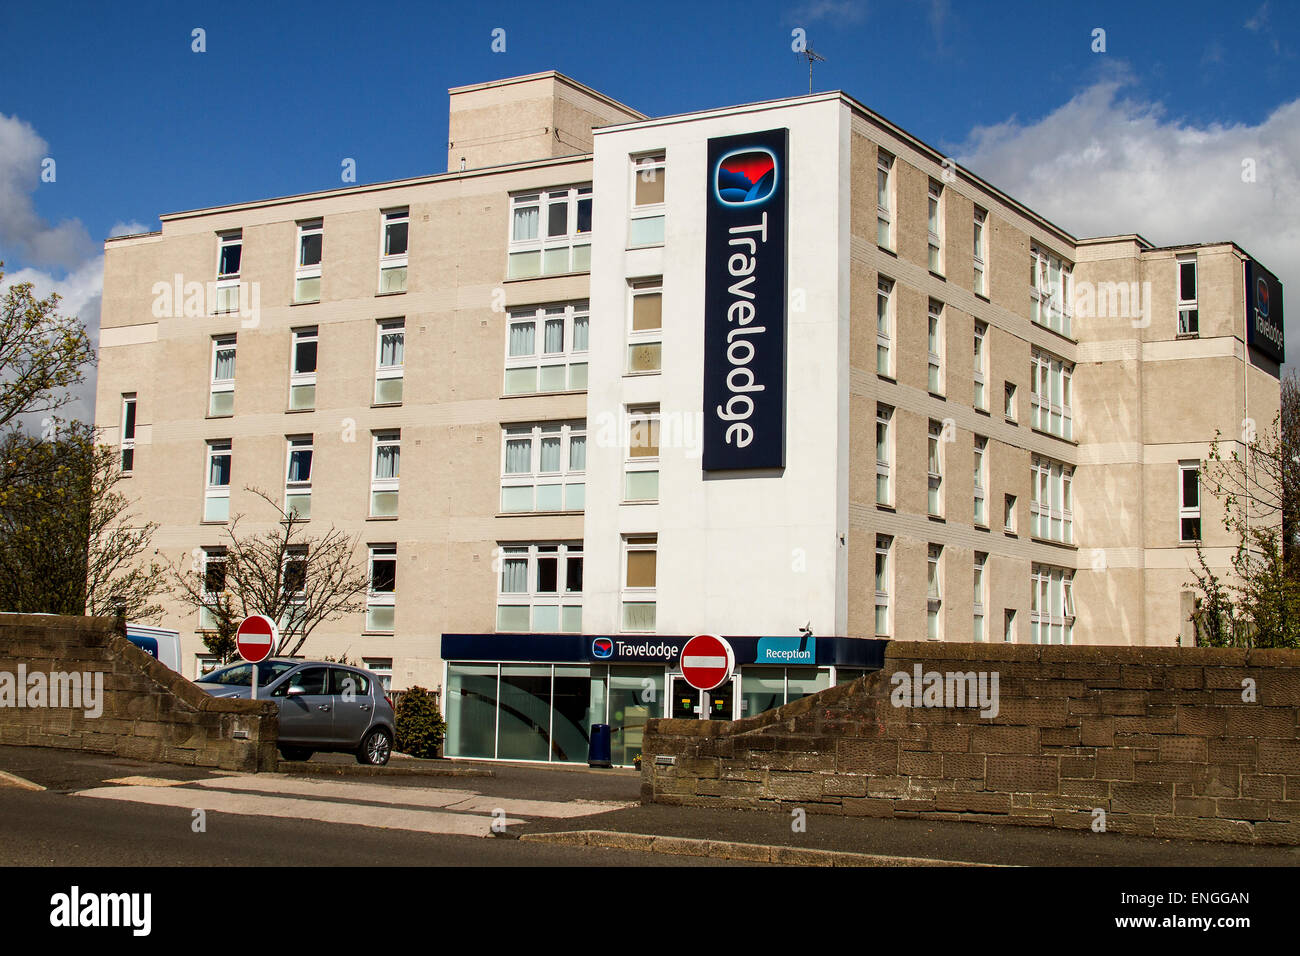 The Travelodge is a Budget hotel and situated along Strathmore Avenue in Dundee, UK Stock Photo